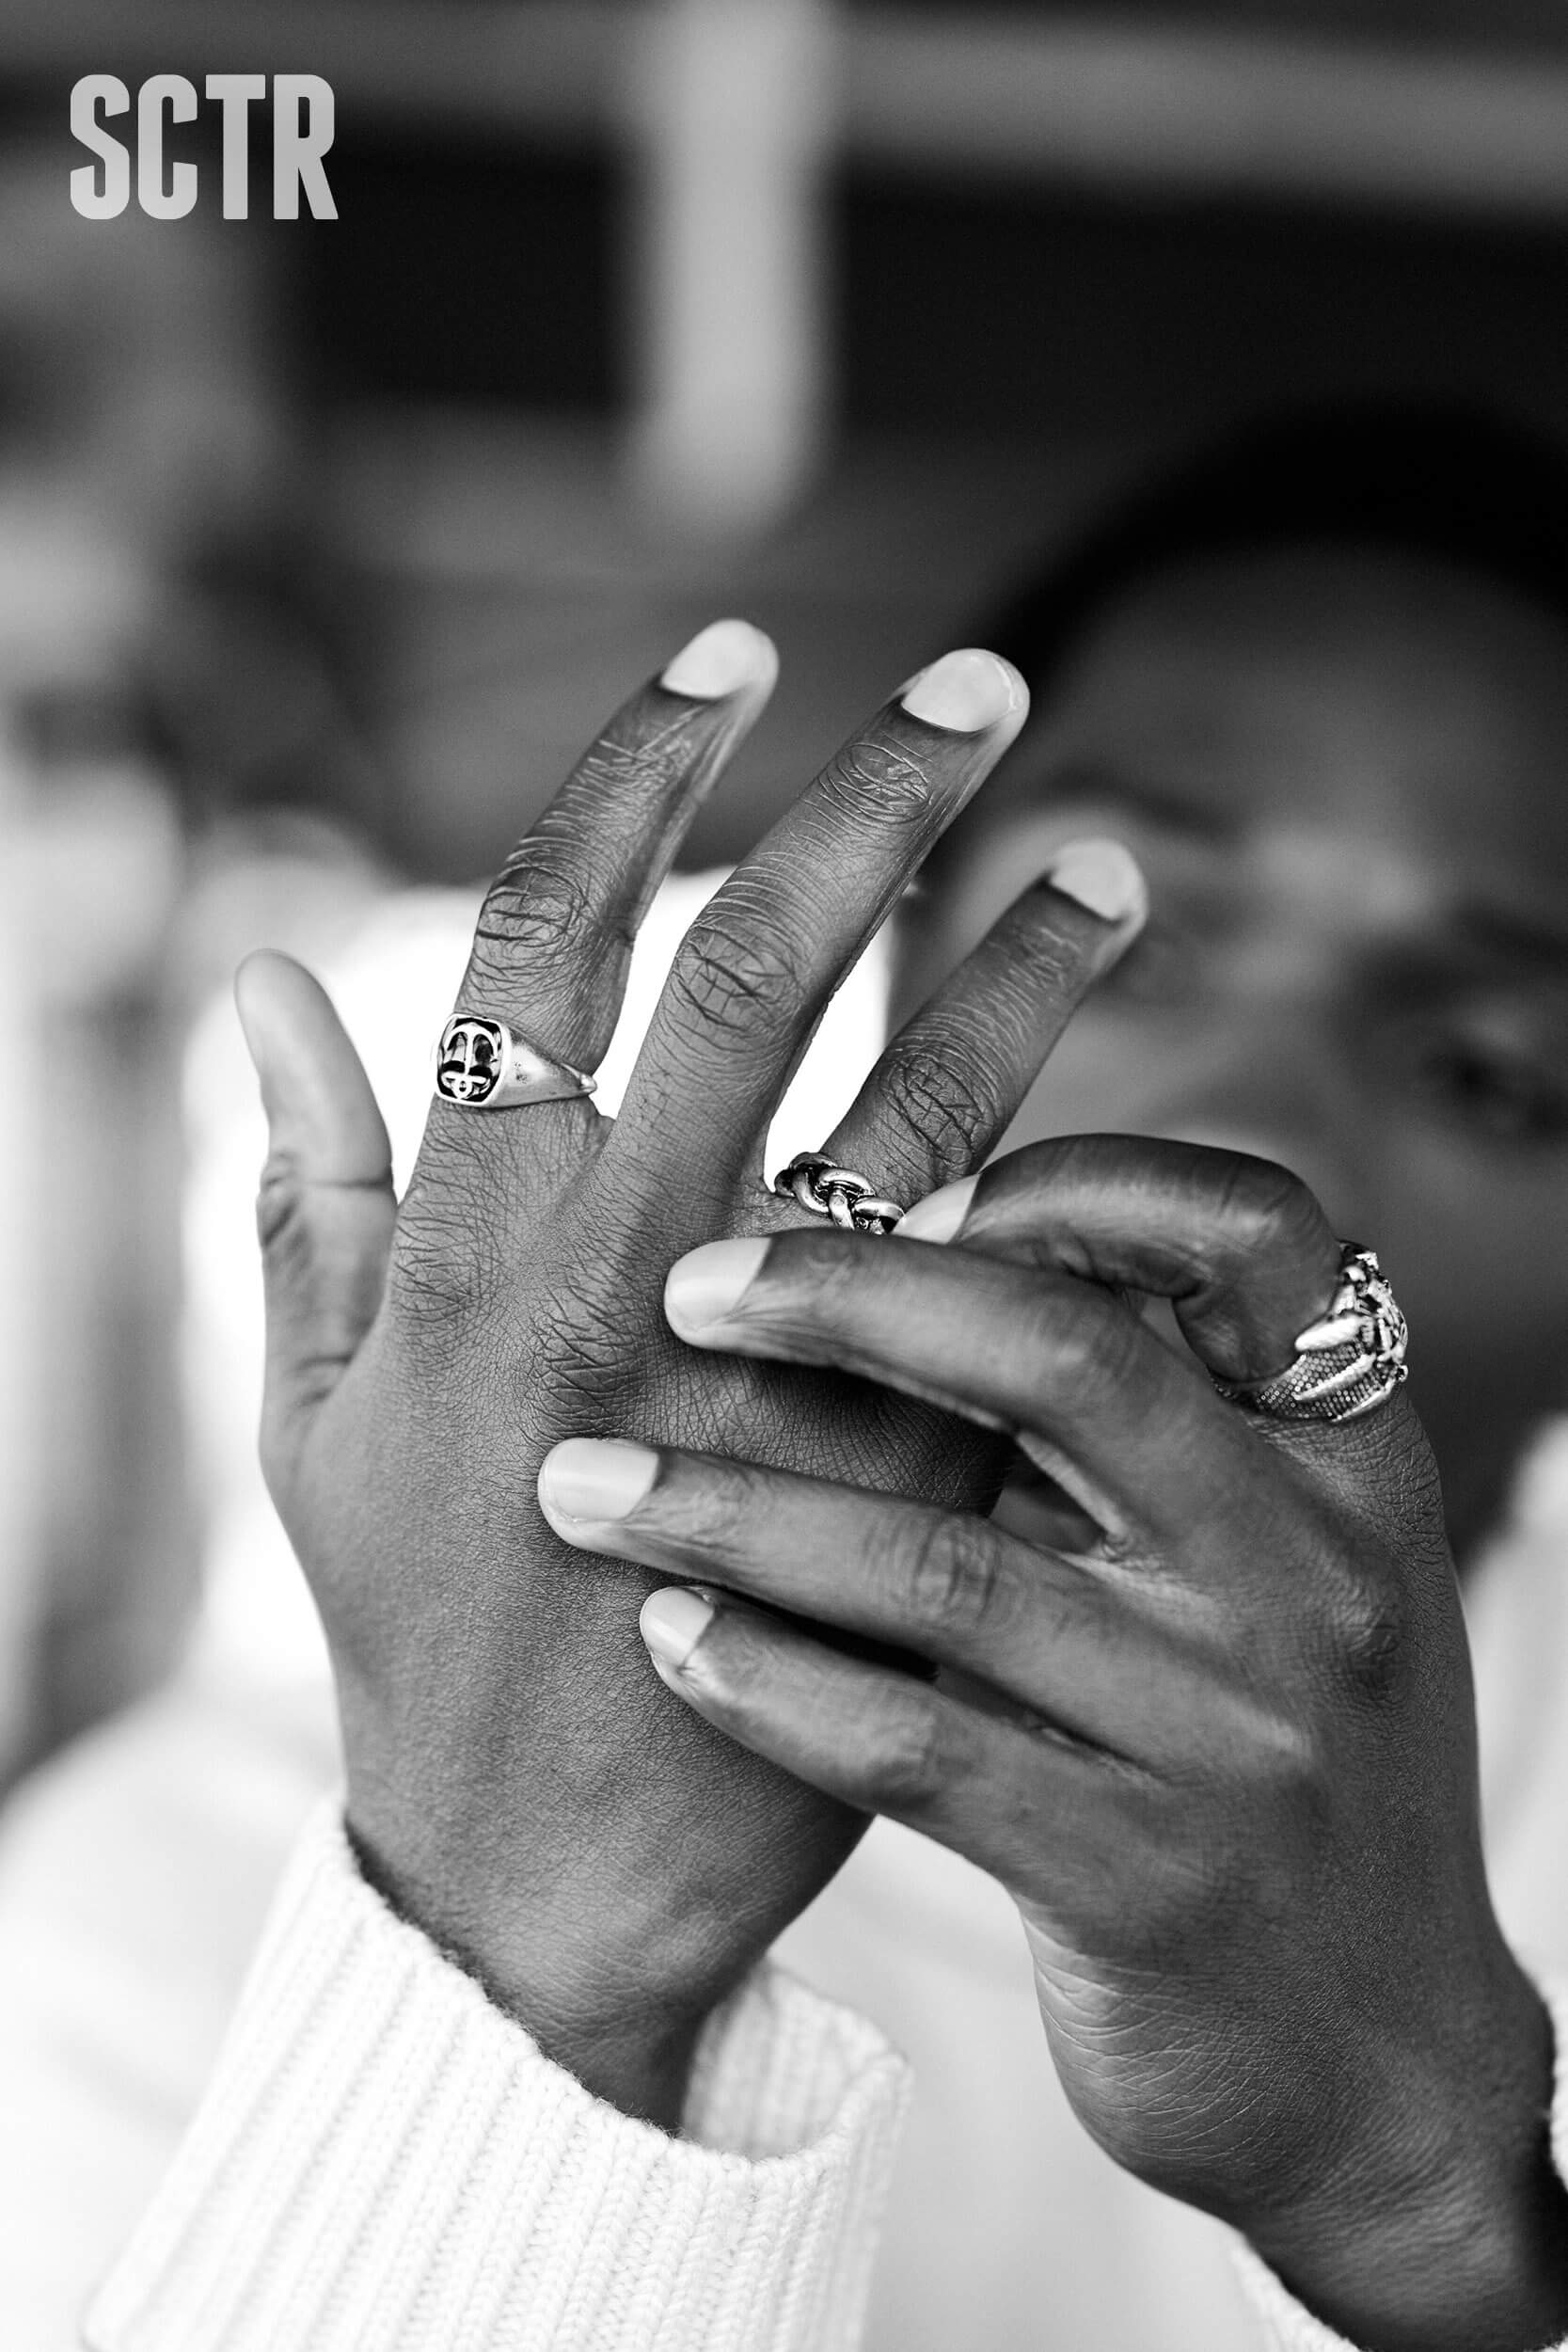 Tosin Cole putting some rings on his fingers